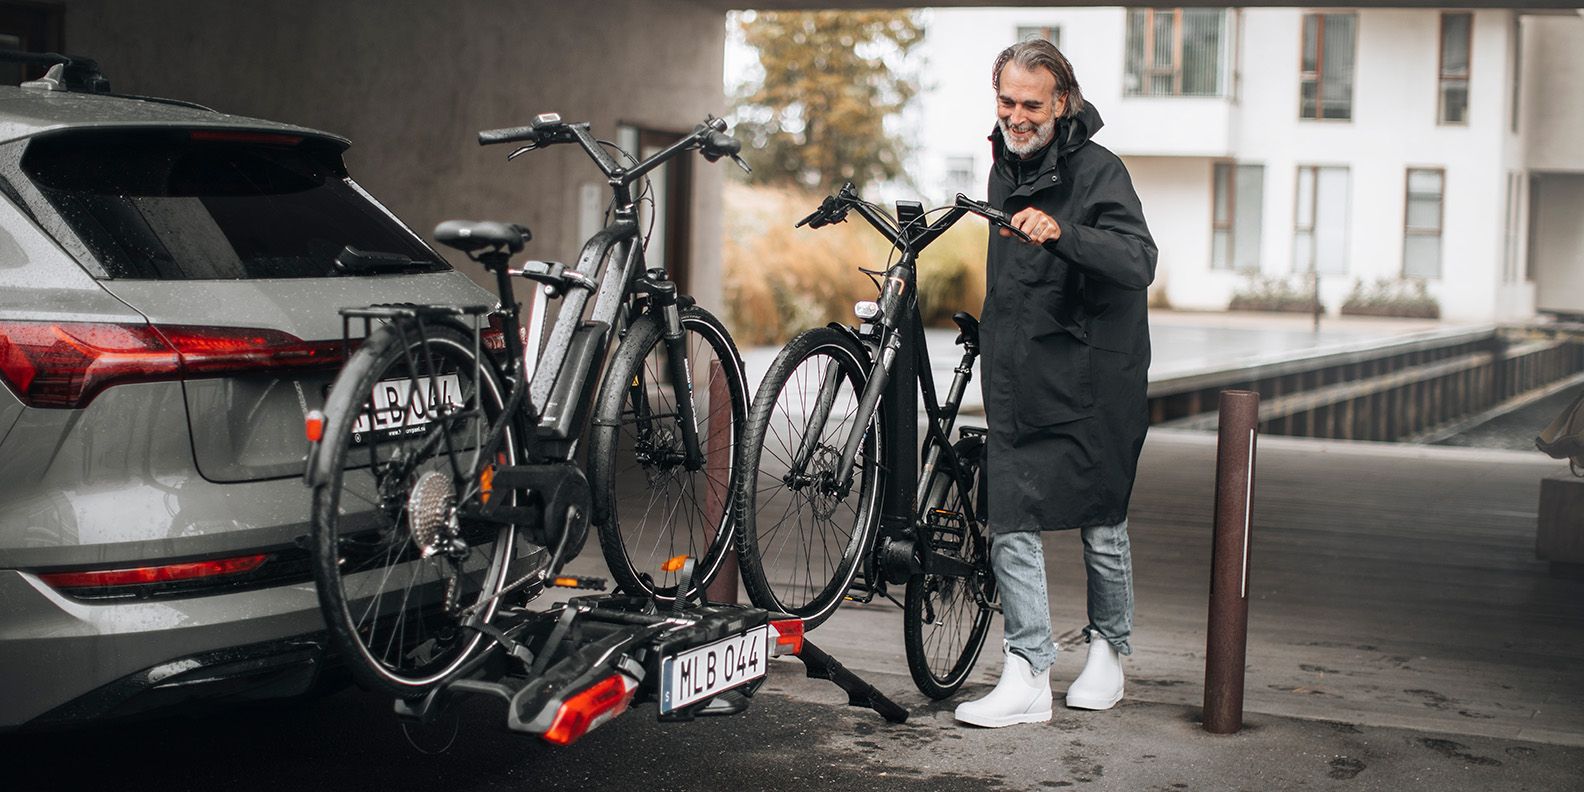 A man uses the Thule Epos Foldable Loading Ramp (sold separately) to mount a heavy e-bike onto the Thule Epos bike rack